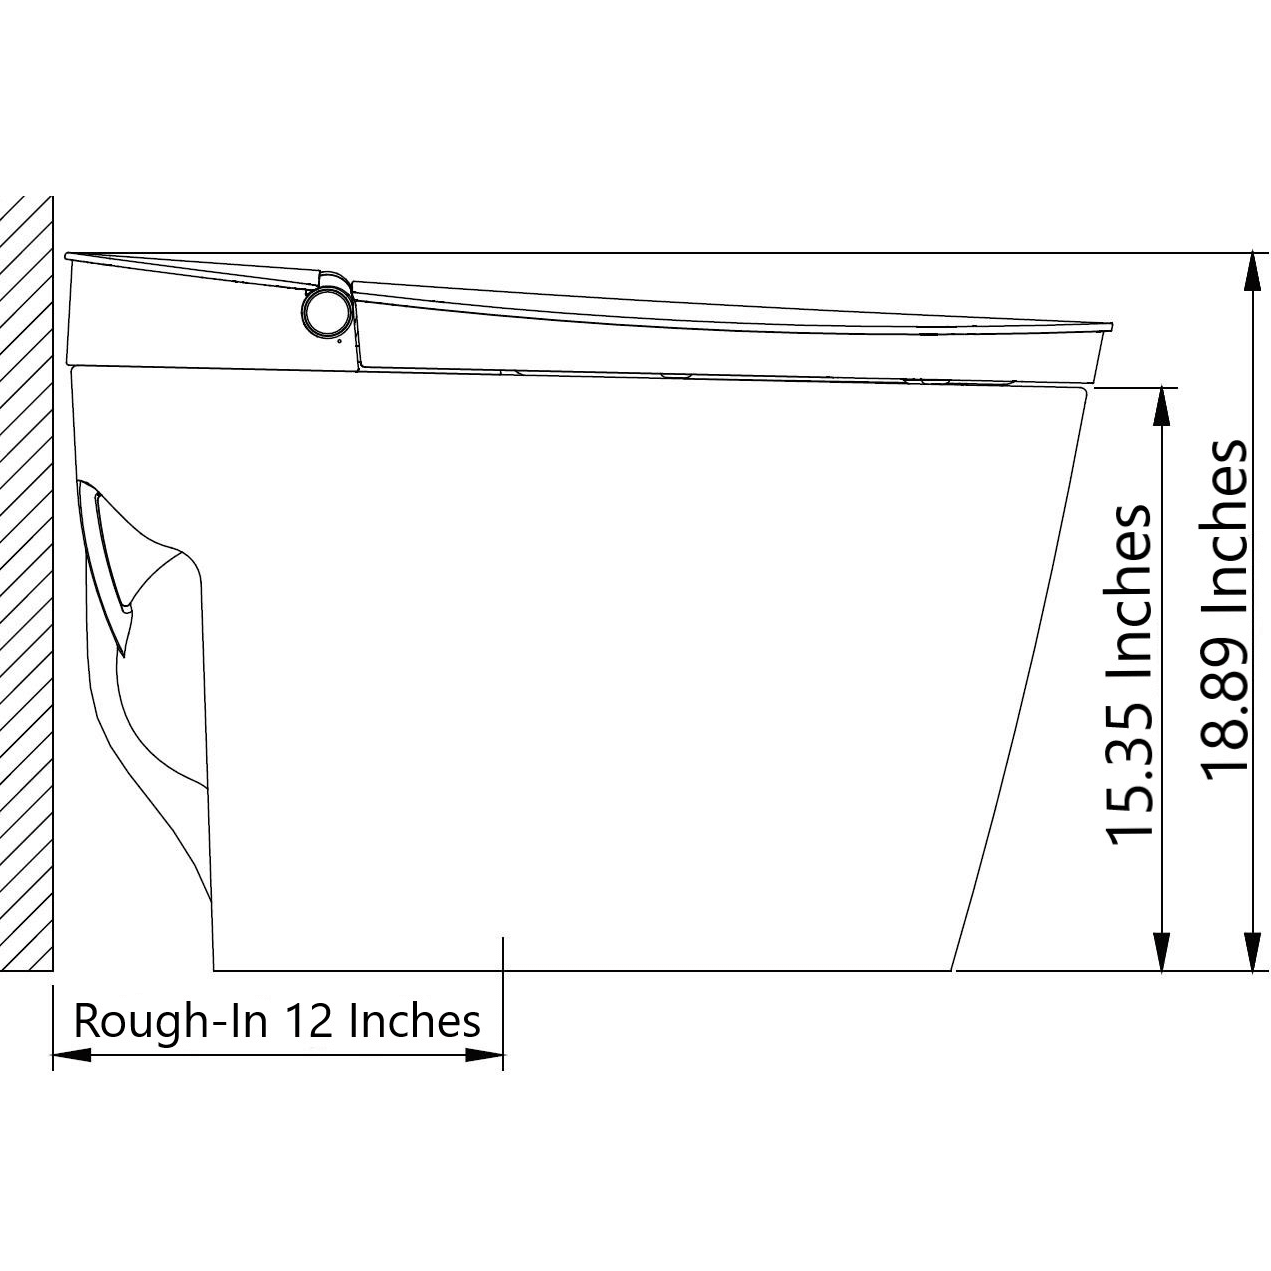 SLi3000 One-Piece Intelligent Toilet - side view diagram with dimensions listed